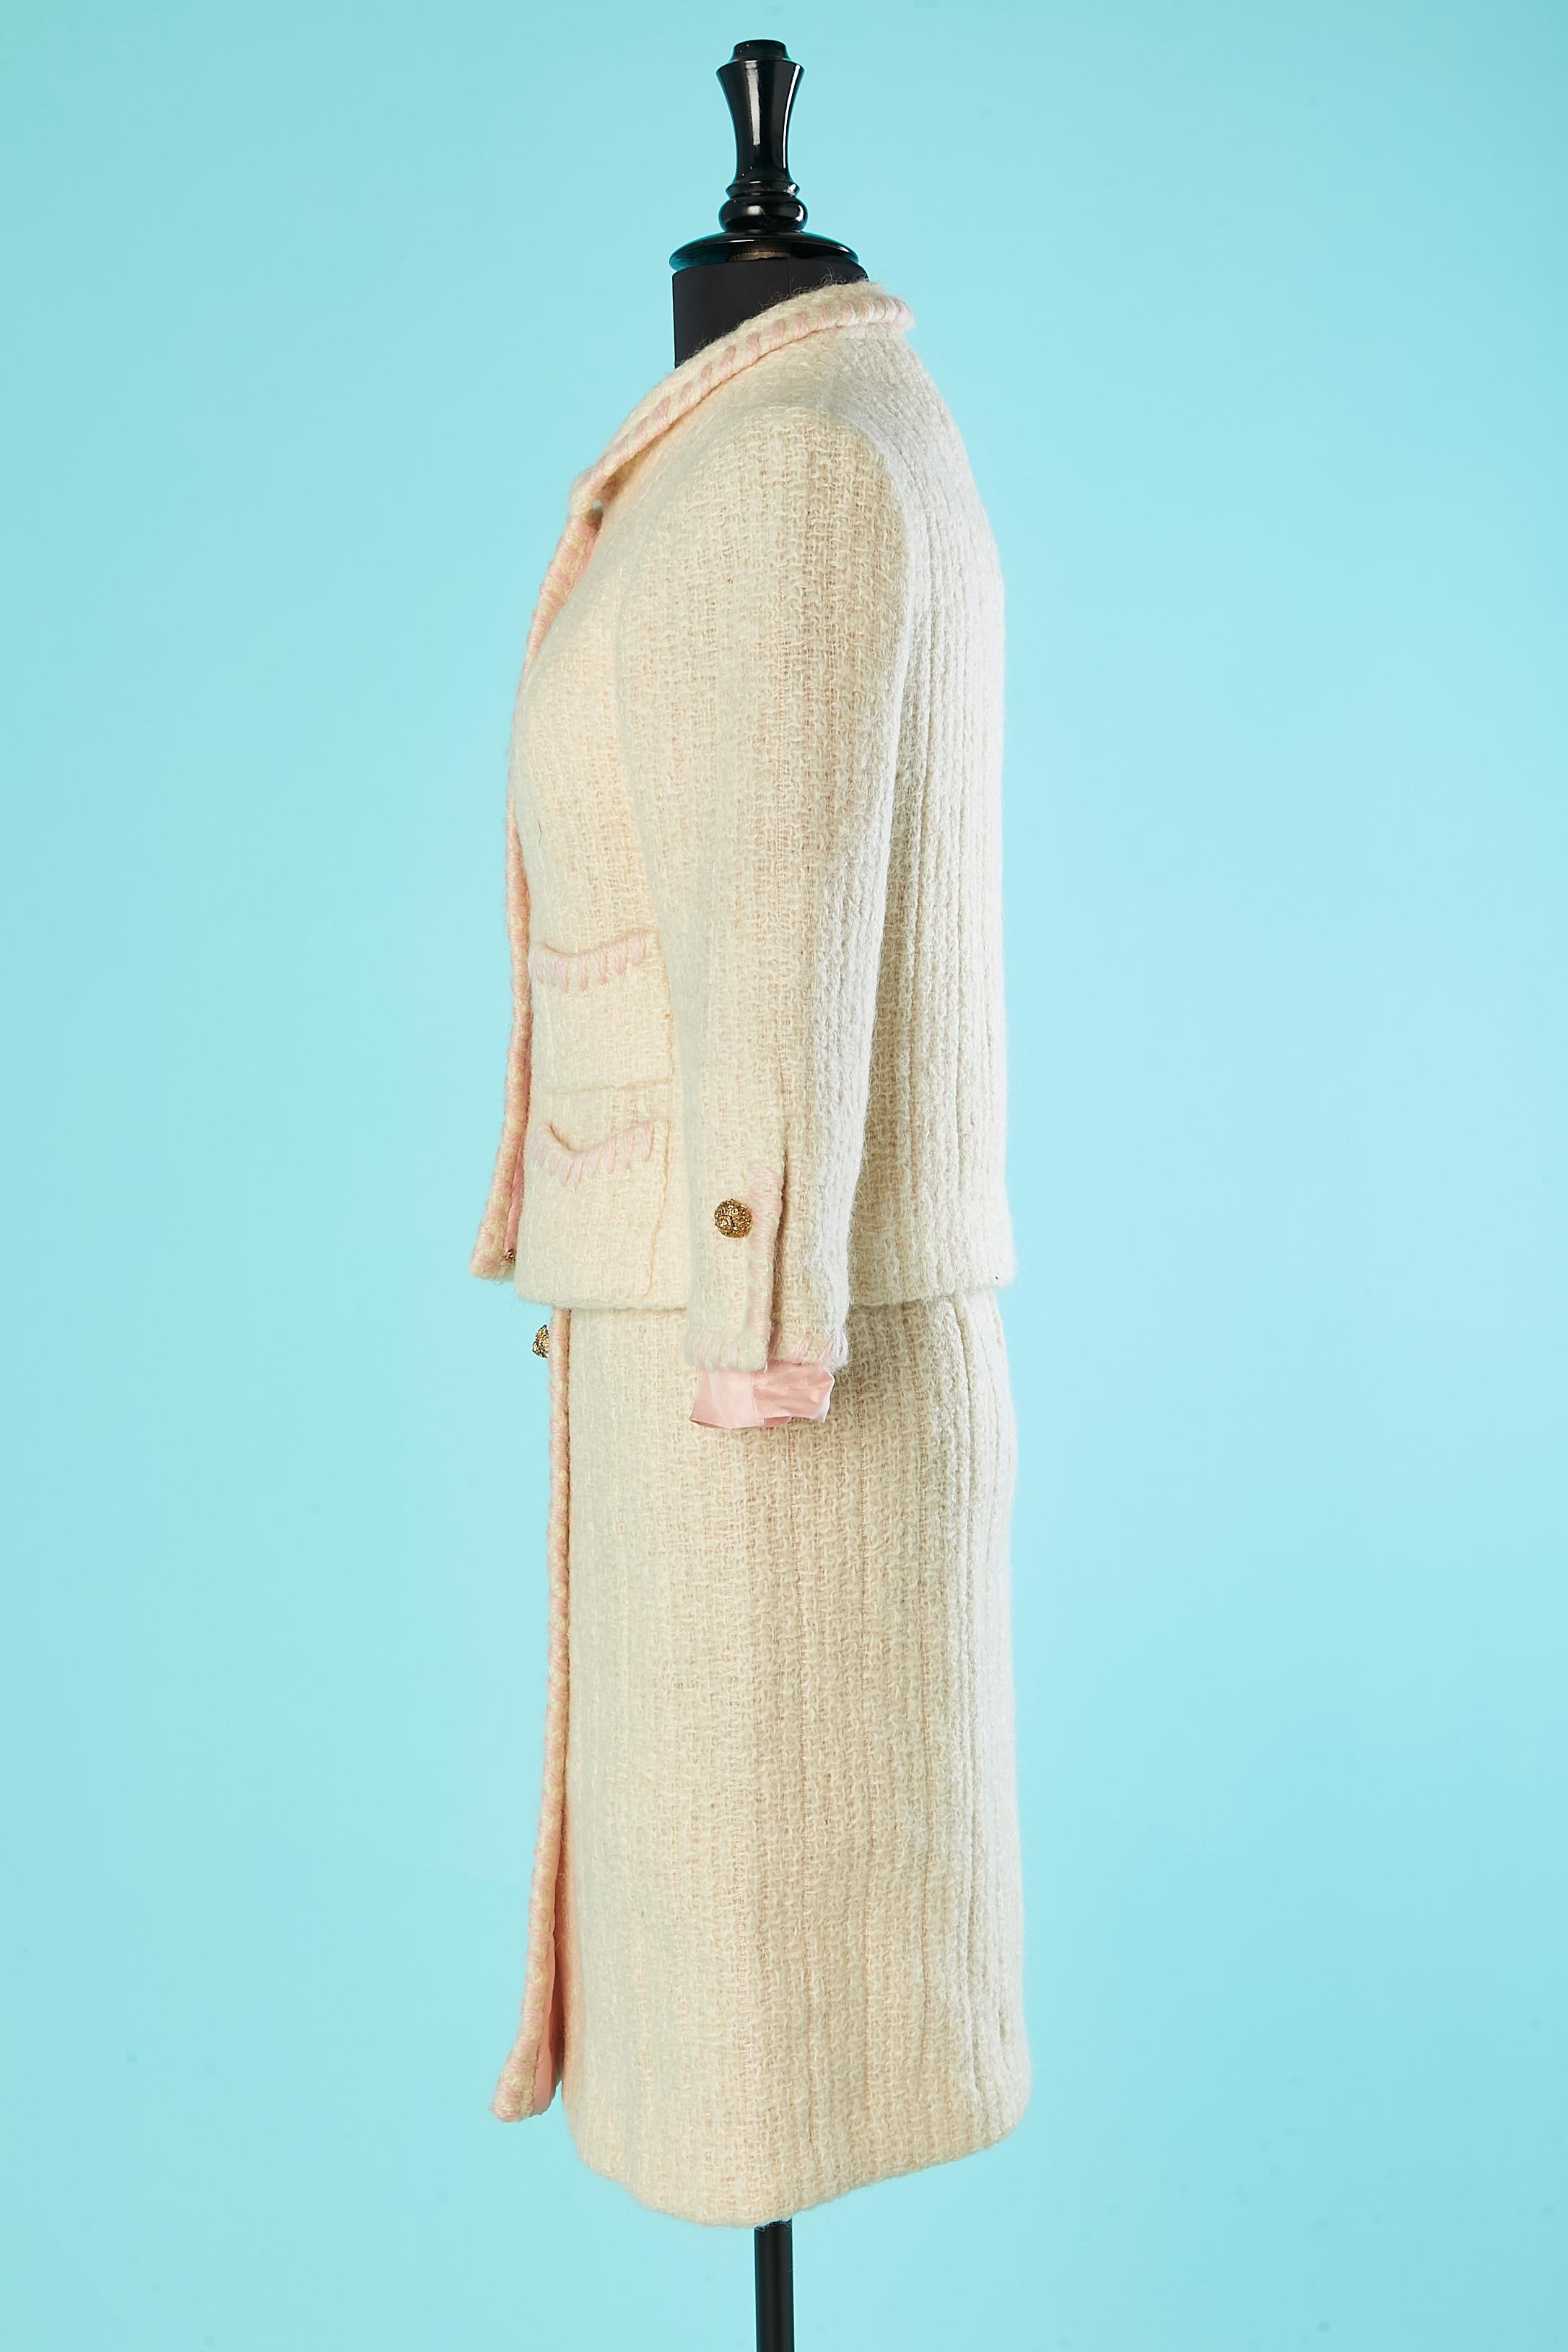 Off-white tweed and pale silk jacket and dress ensemble Chanel 1964  2